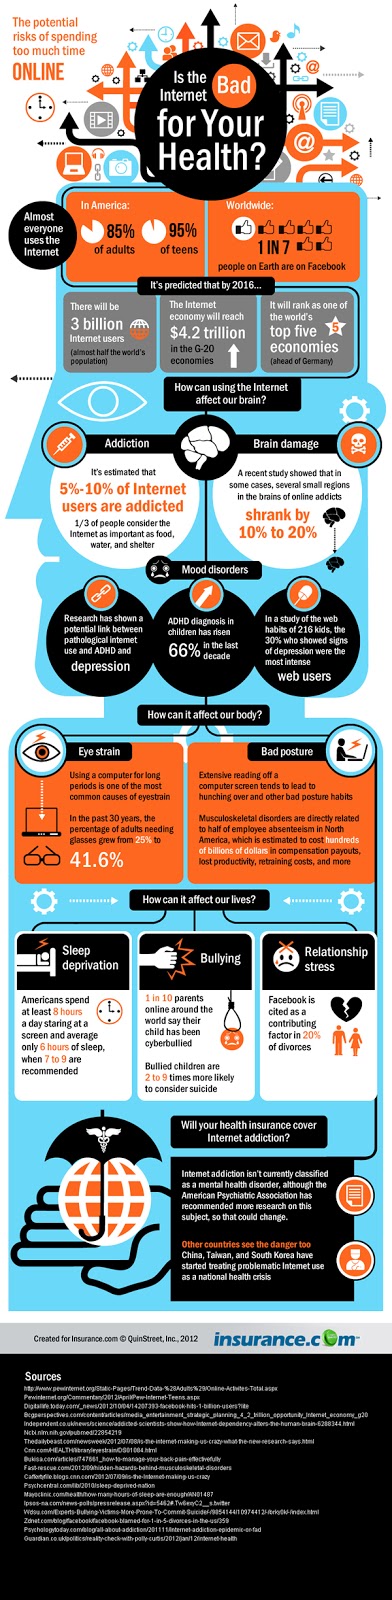 internet-bad-for-health-infographic